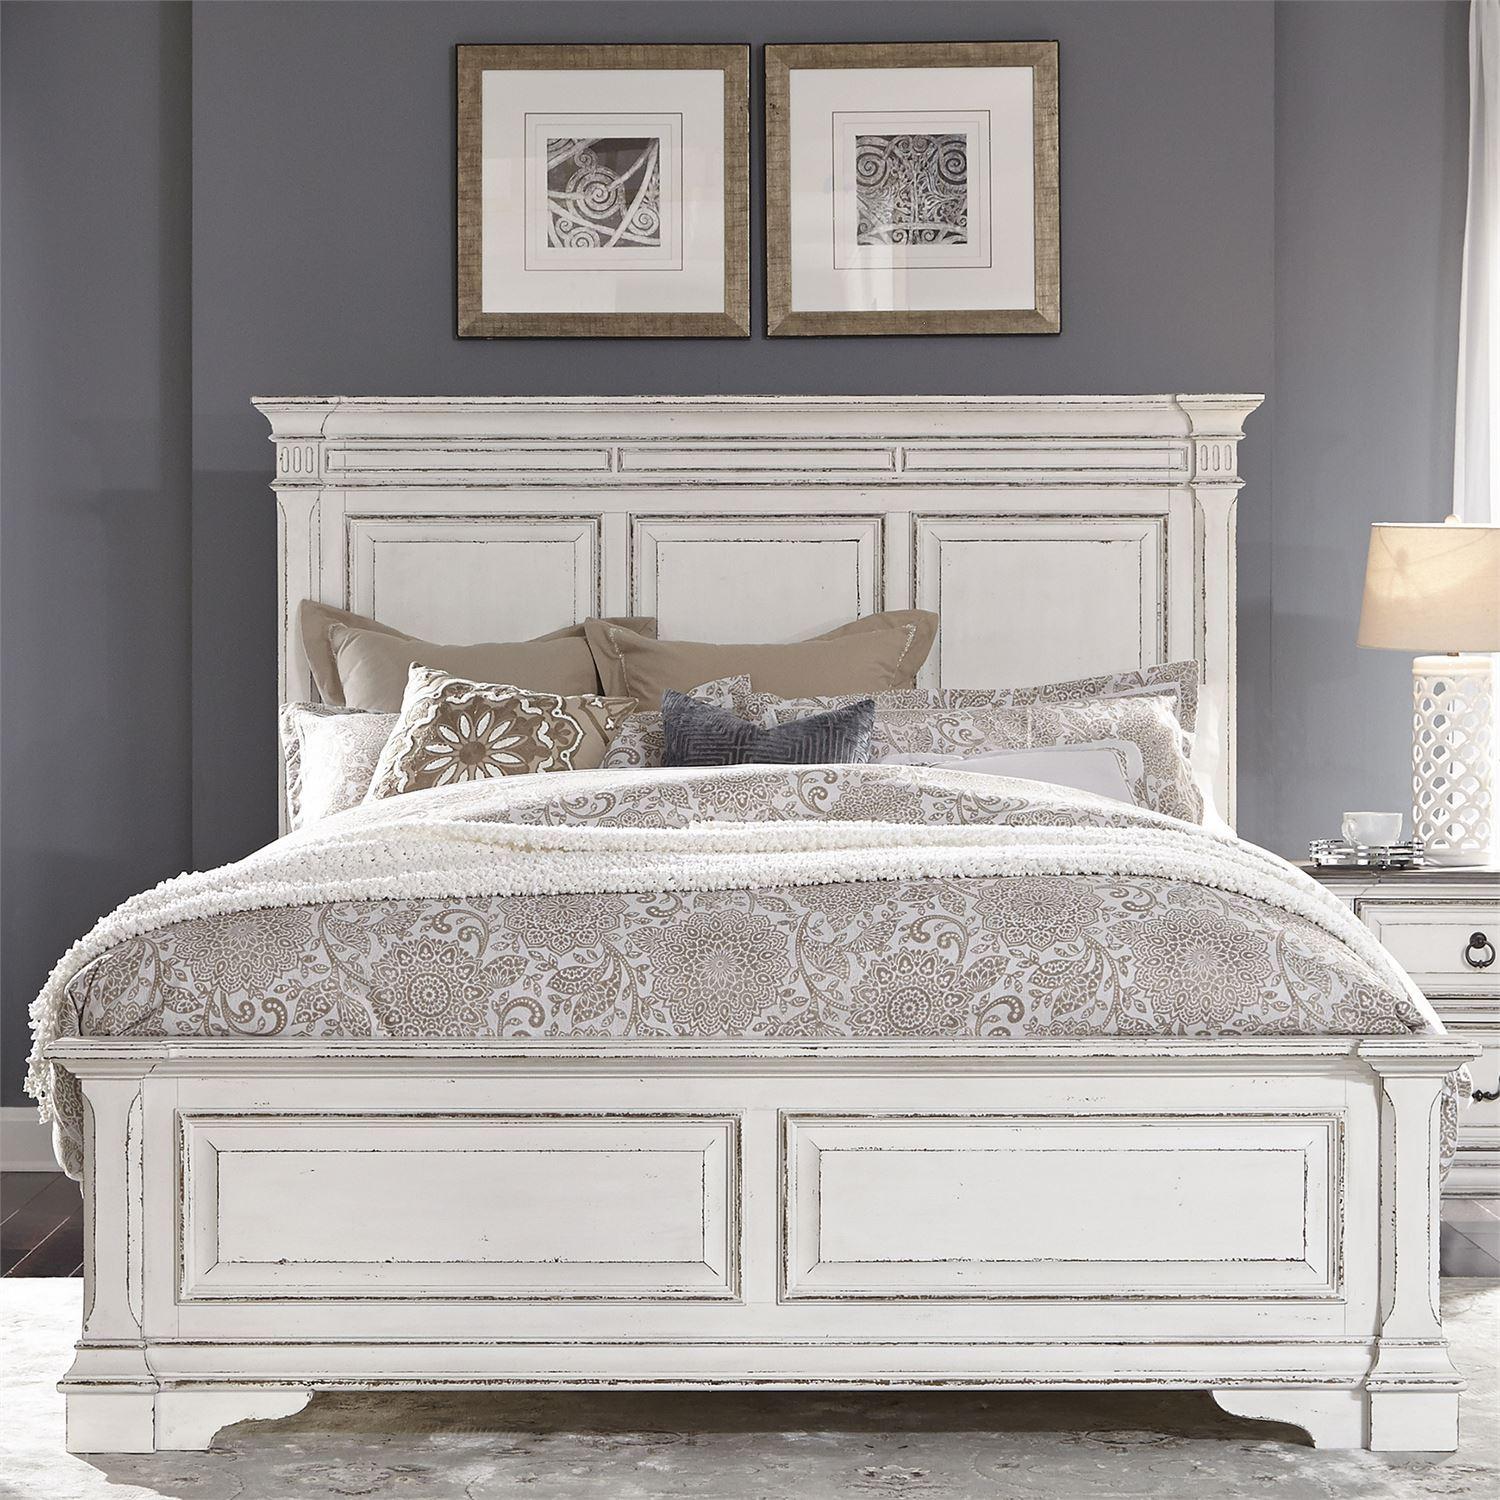 Traditional Panel Bed Abbey Park 520-BR-KPB 520-BR-KPB in White 